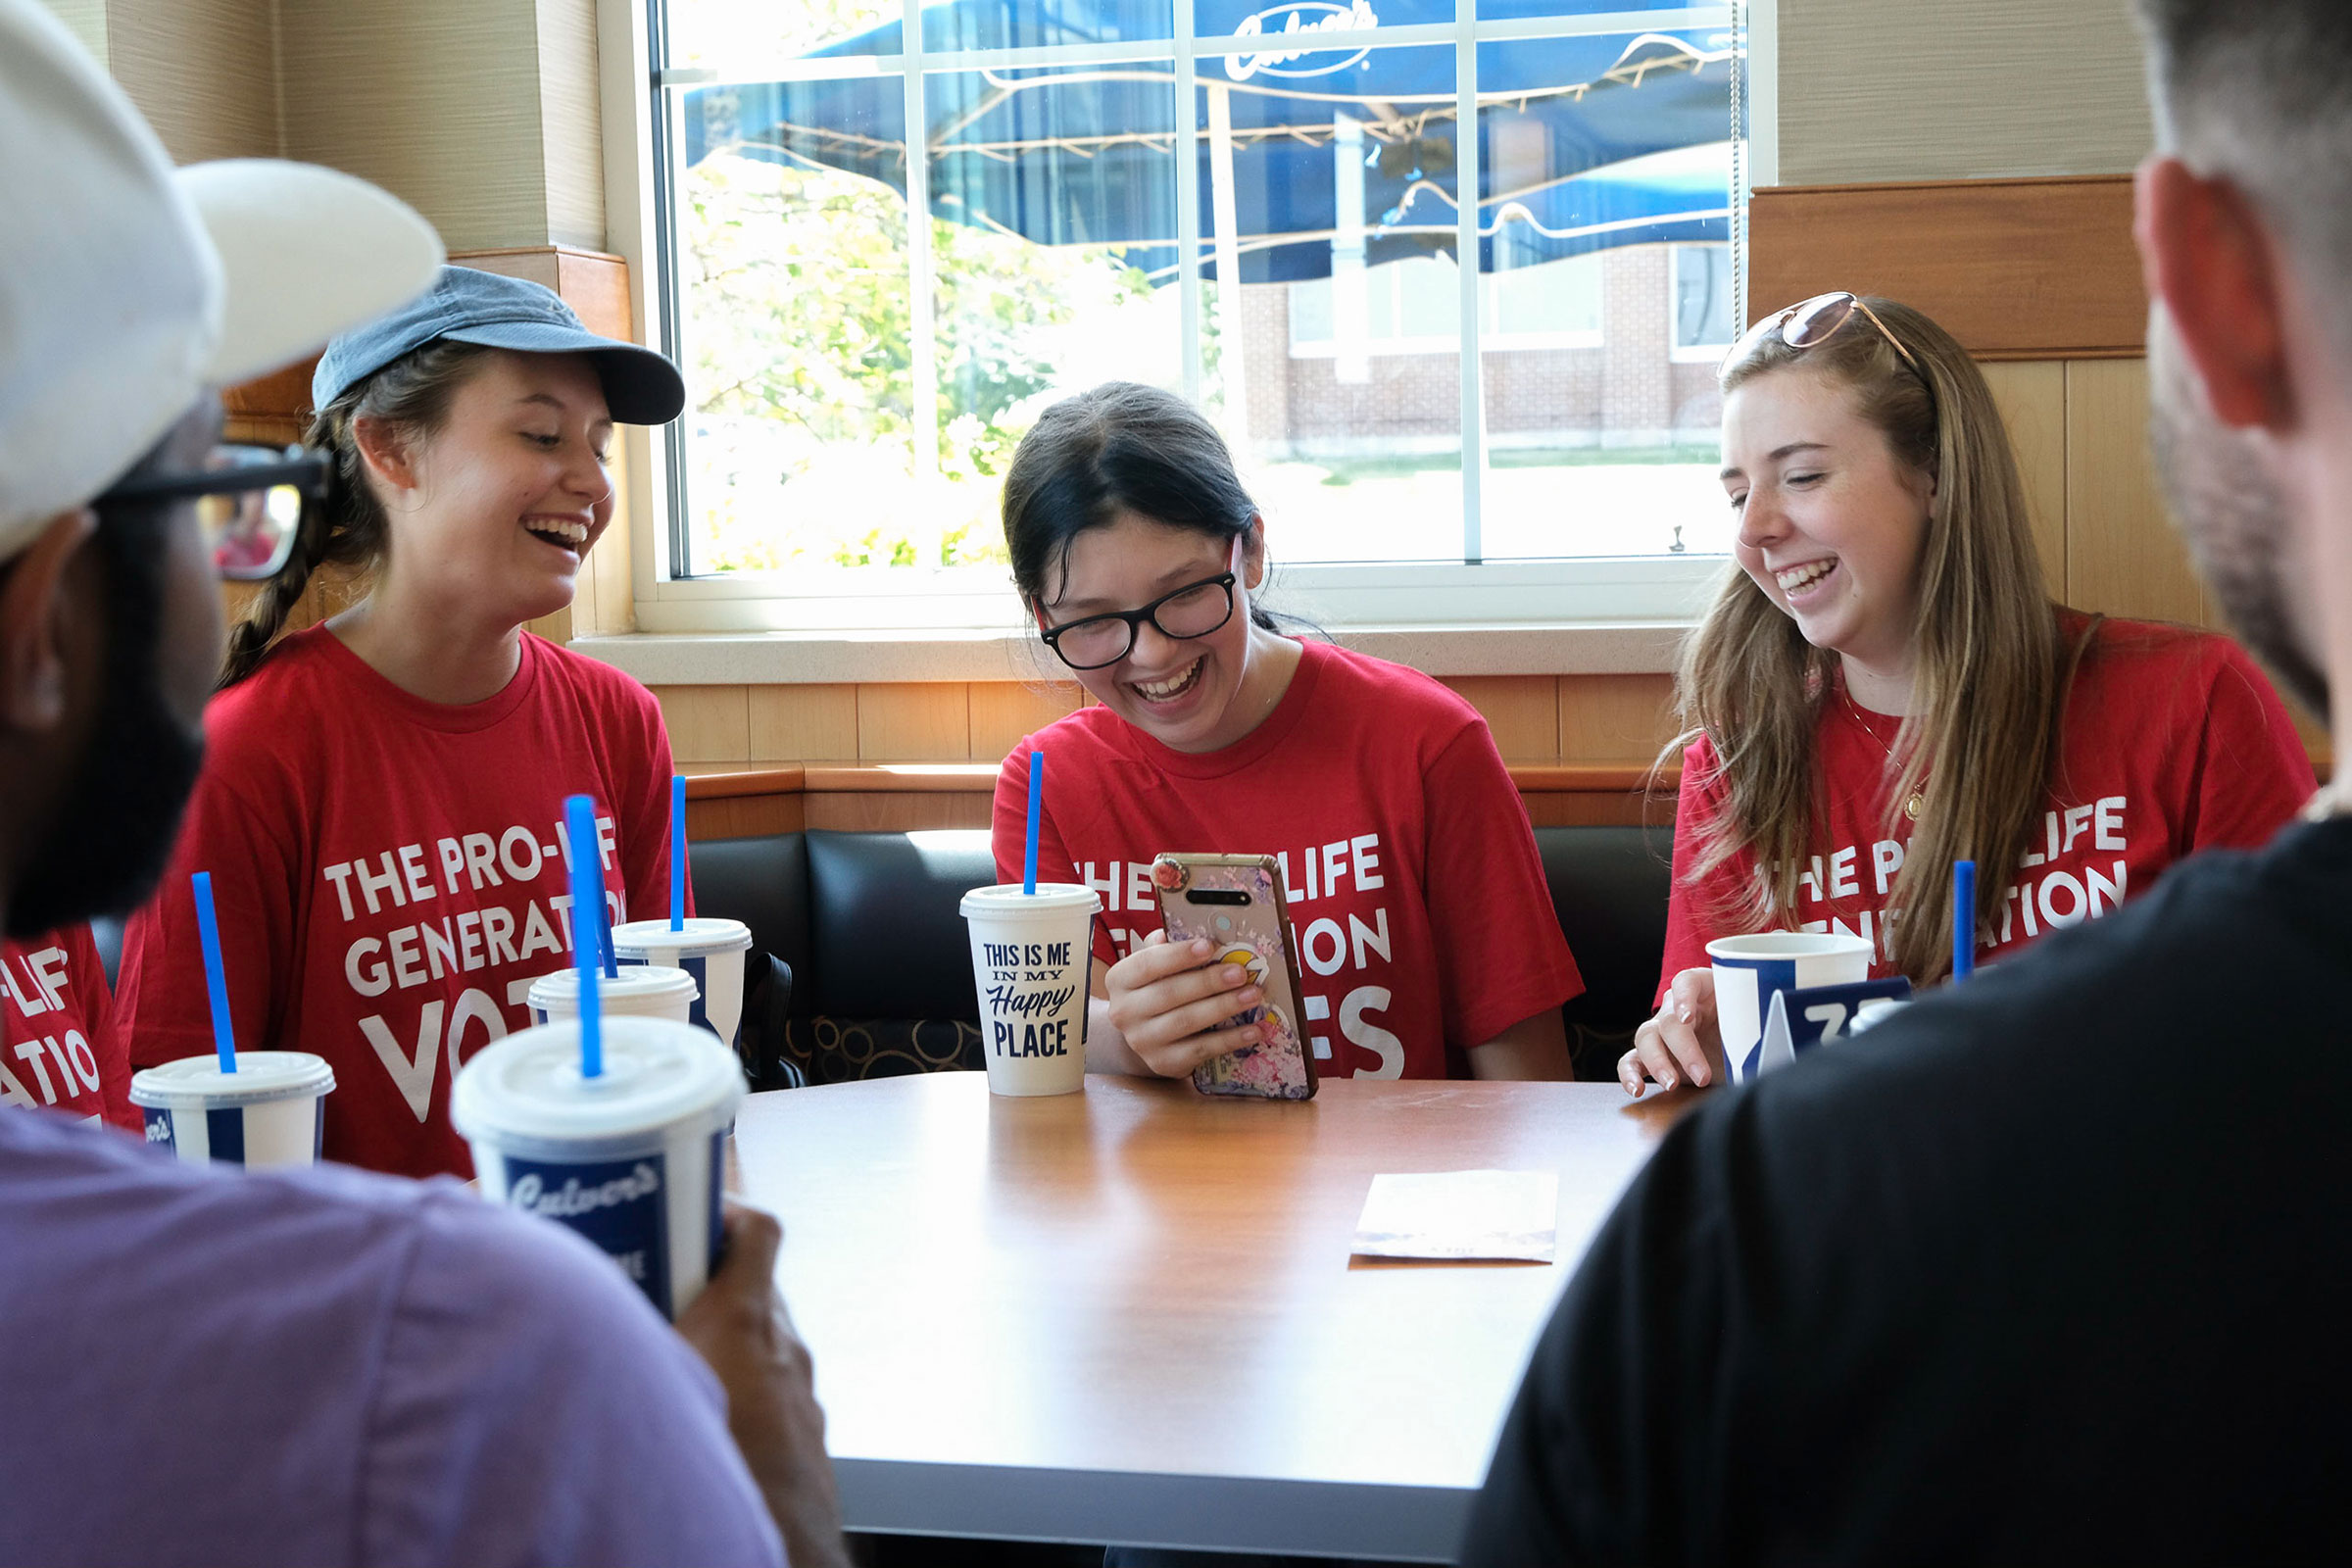 Students for Life of America volunteers take a break for lunch while canvassing in Johnson County on July 23. (Arin Yoon for TIME)